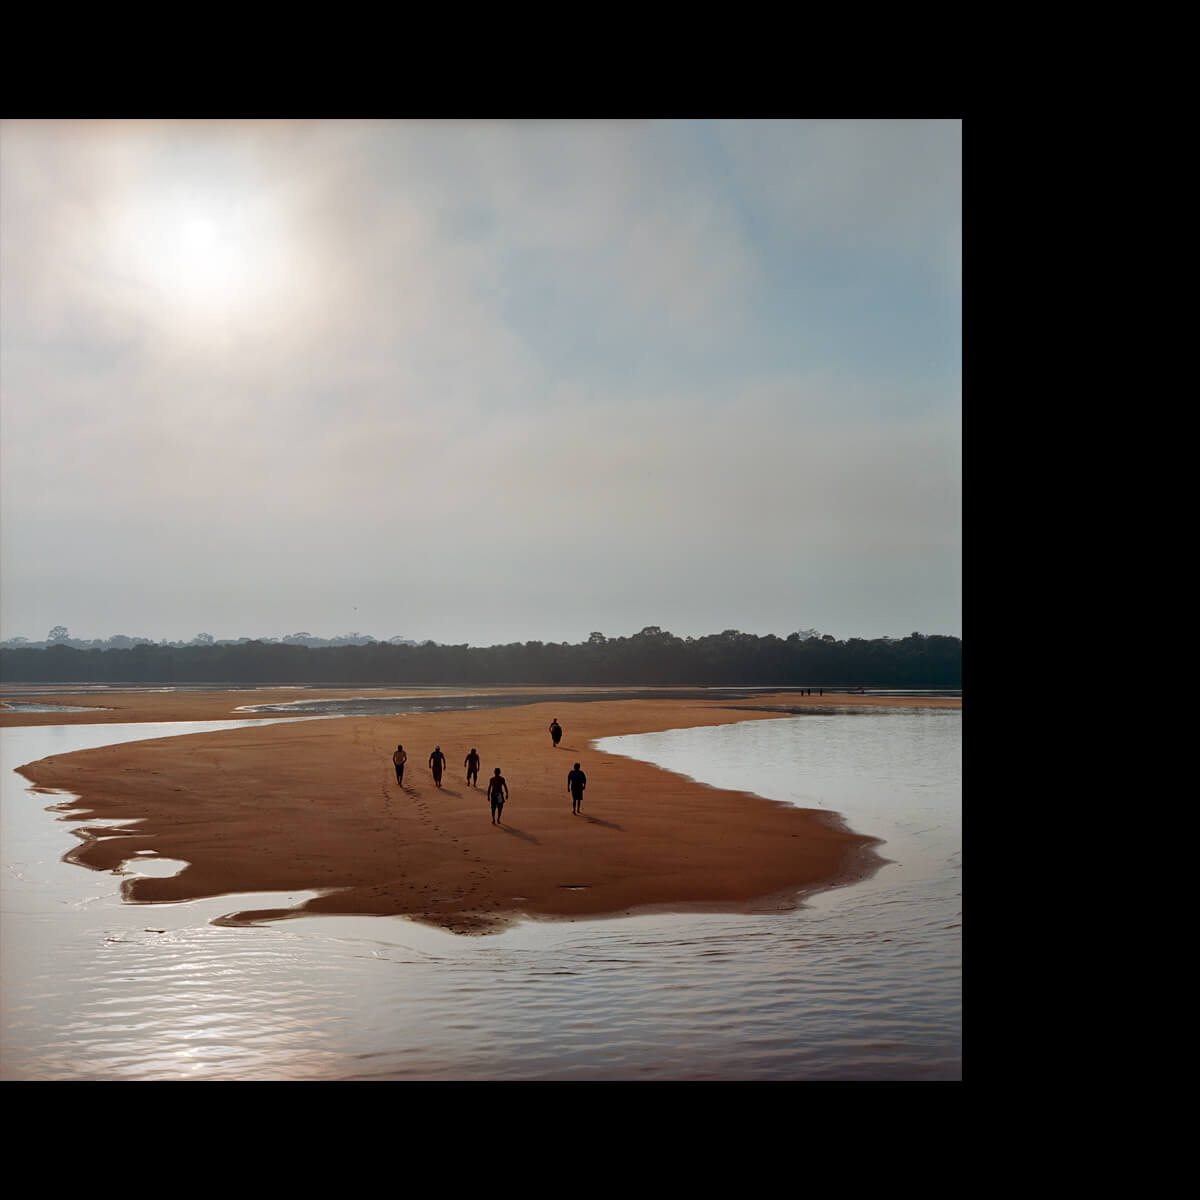 A photograph in which a group of people walk on a sandbar underneath a bright, clouded sun. The photo is offset in a field of plain black.